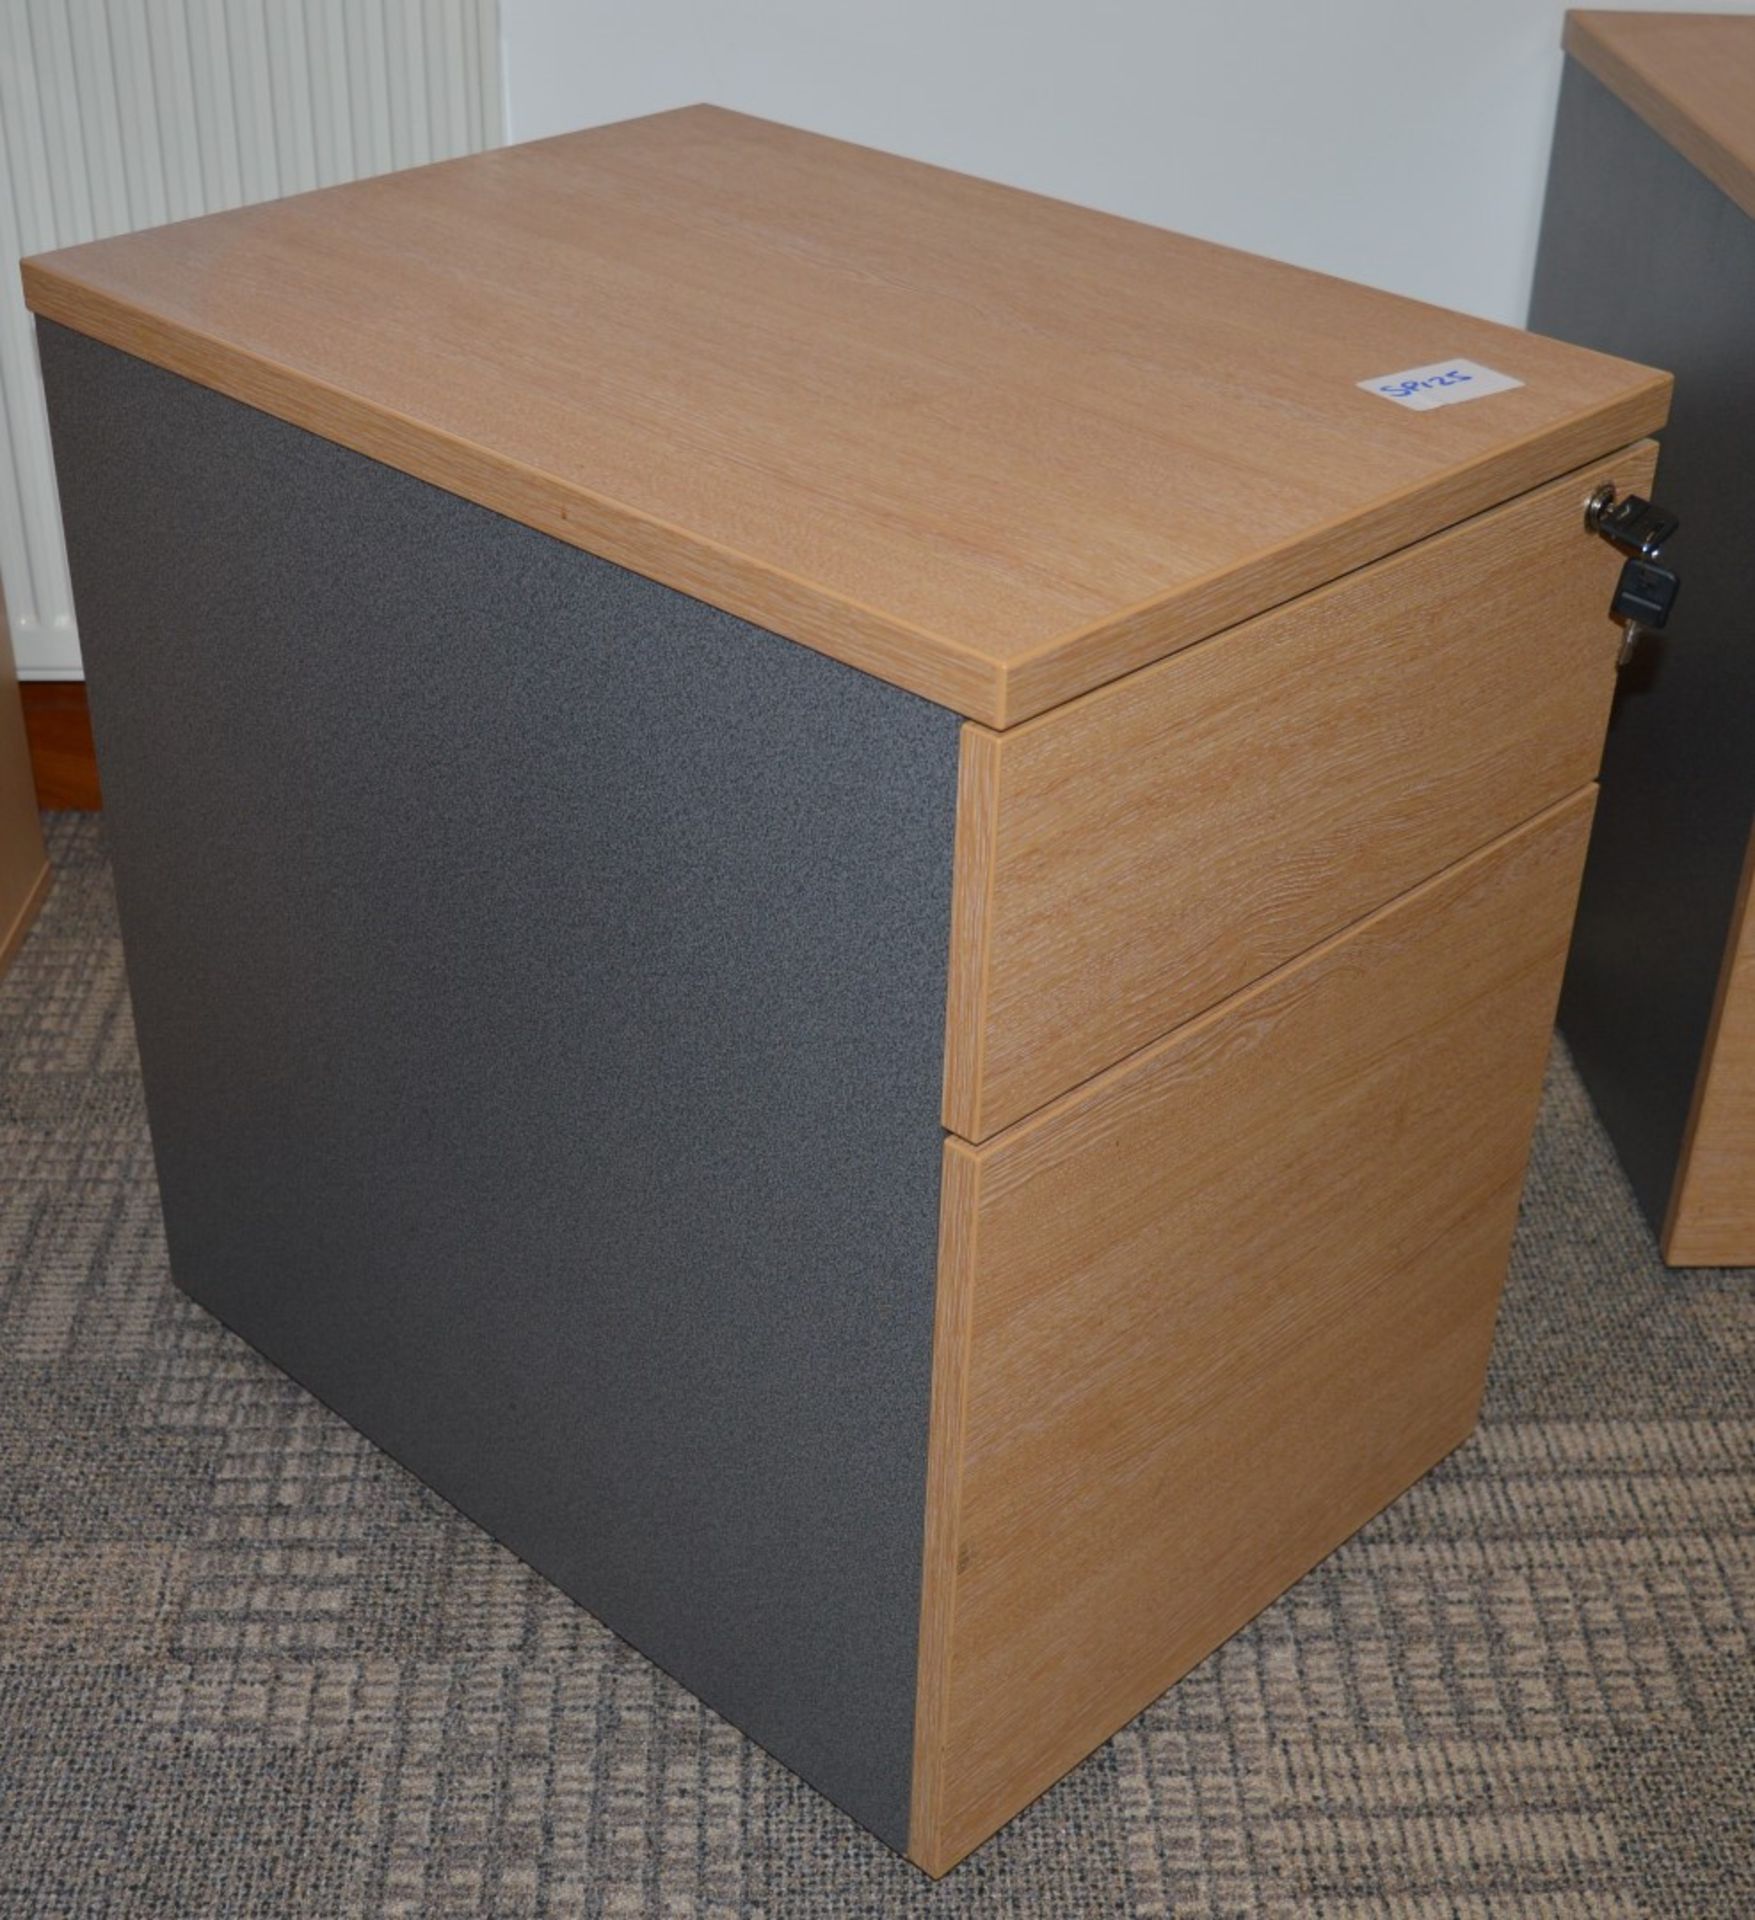 1 x Two Drawer Mobile Pedestal Drawers - Includes Key - Modern Beech / Grey Finish - Storage - Image 2 of 3